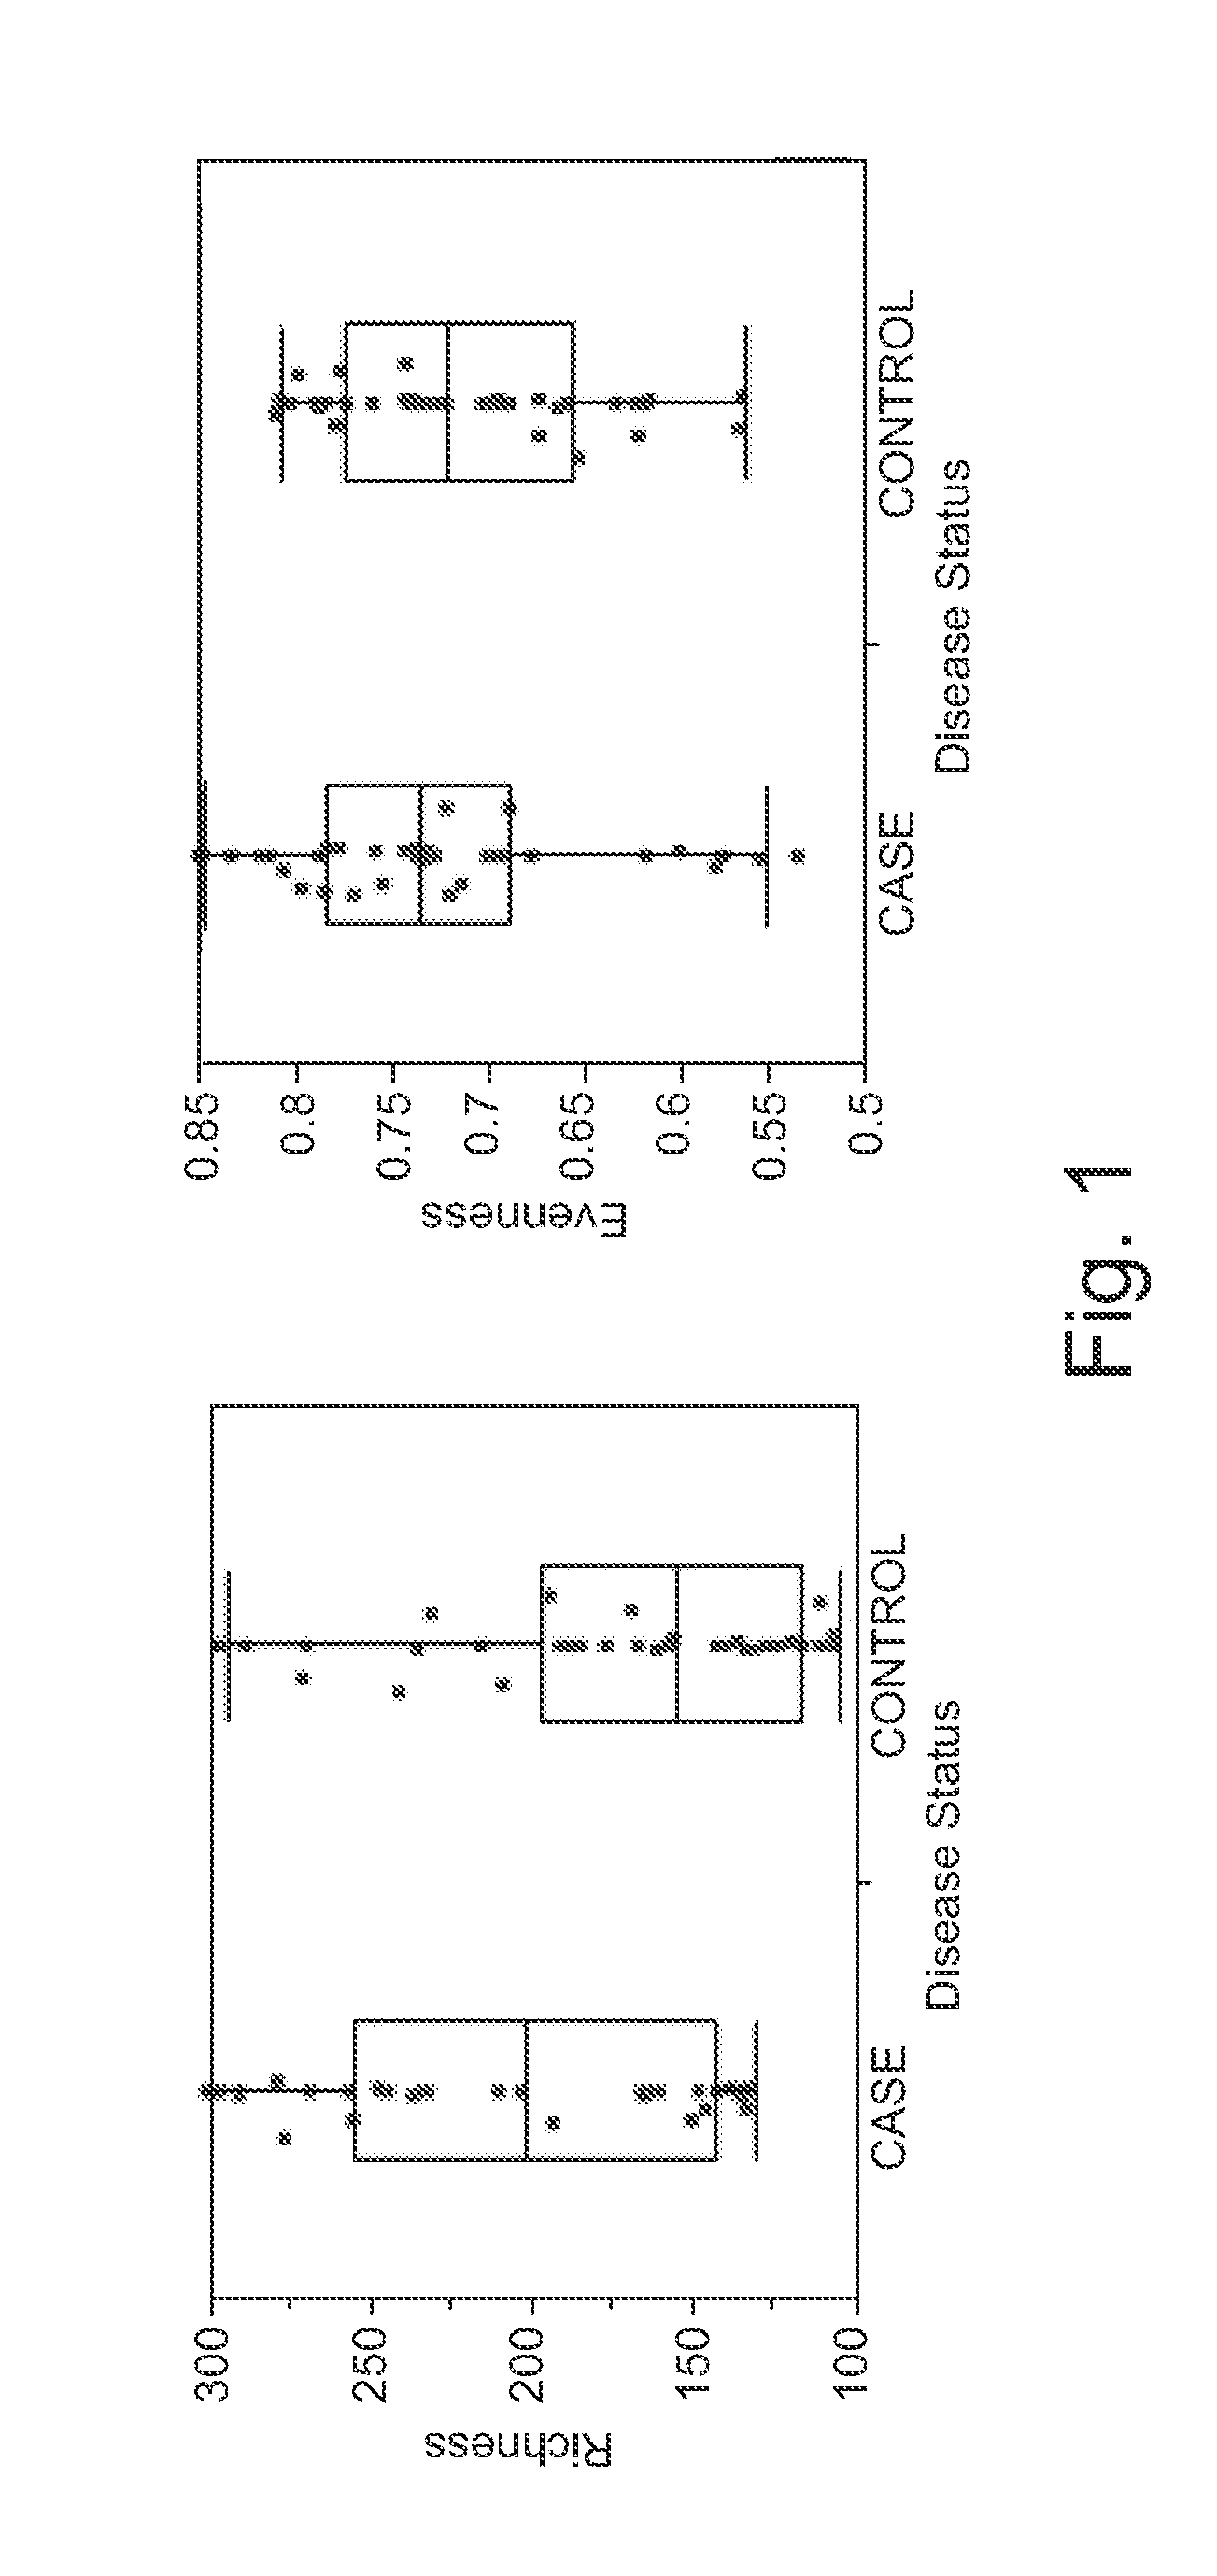 Methods and kits for detecting adenomas, colorectal cancer, and uses thereof